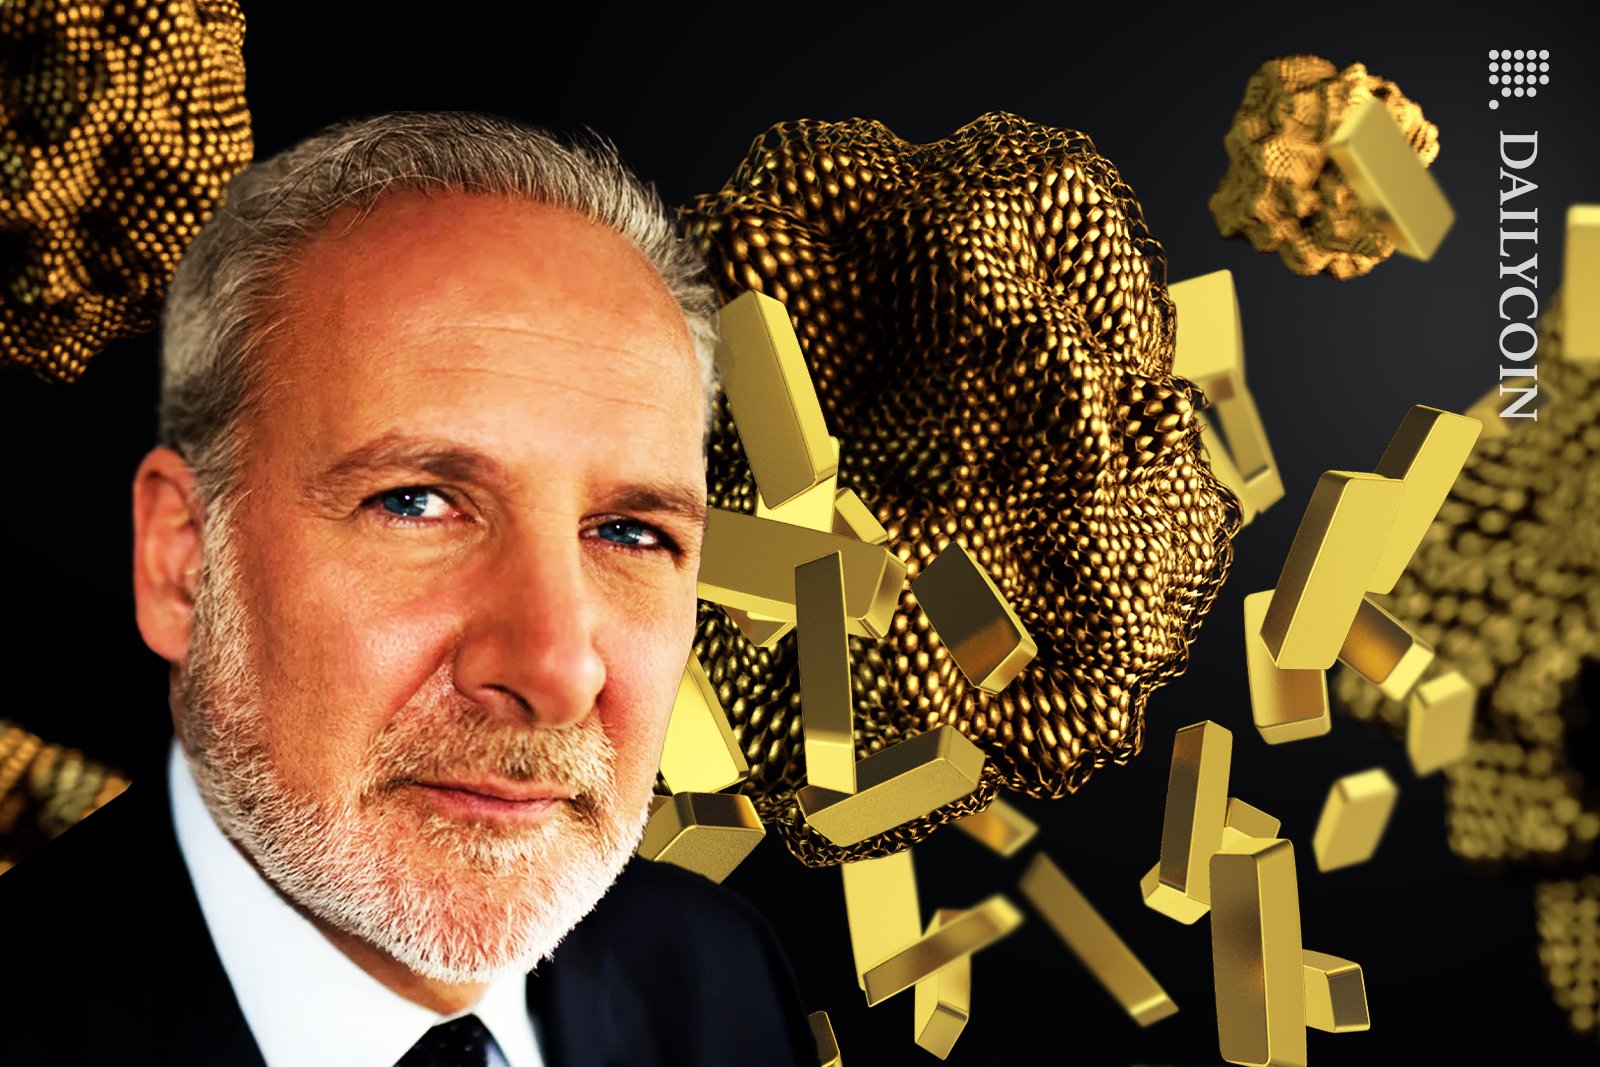 Gold Bars hitting digital fragments in the air. Peter Schiff is looking to discuss this.